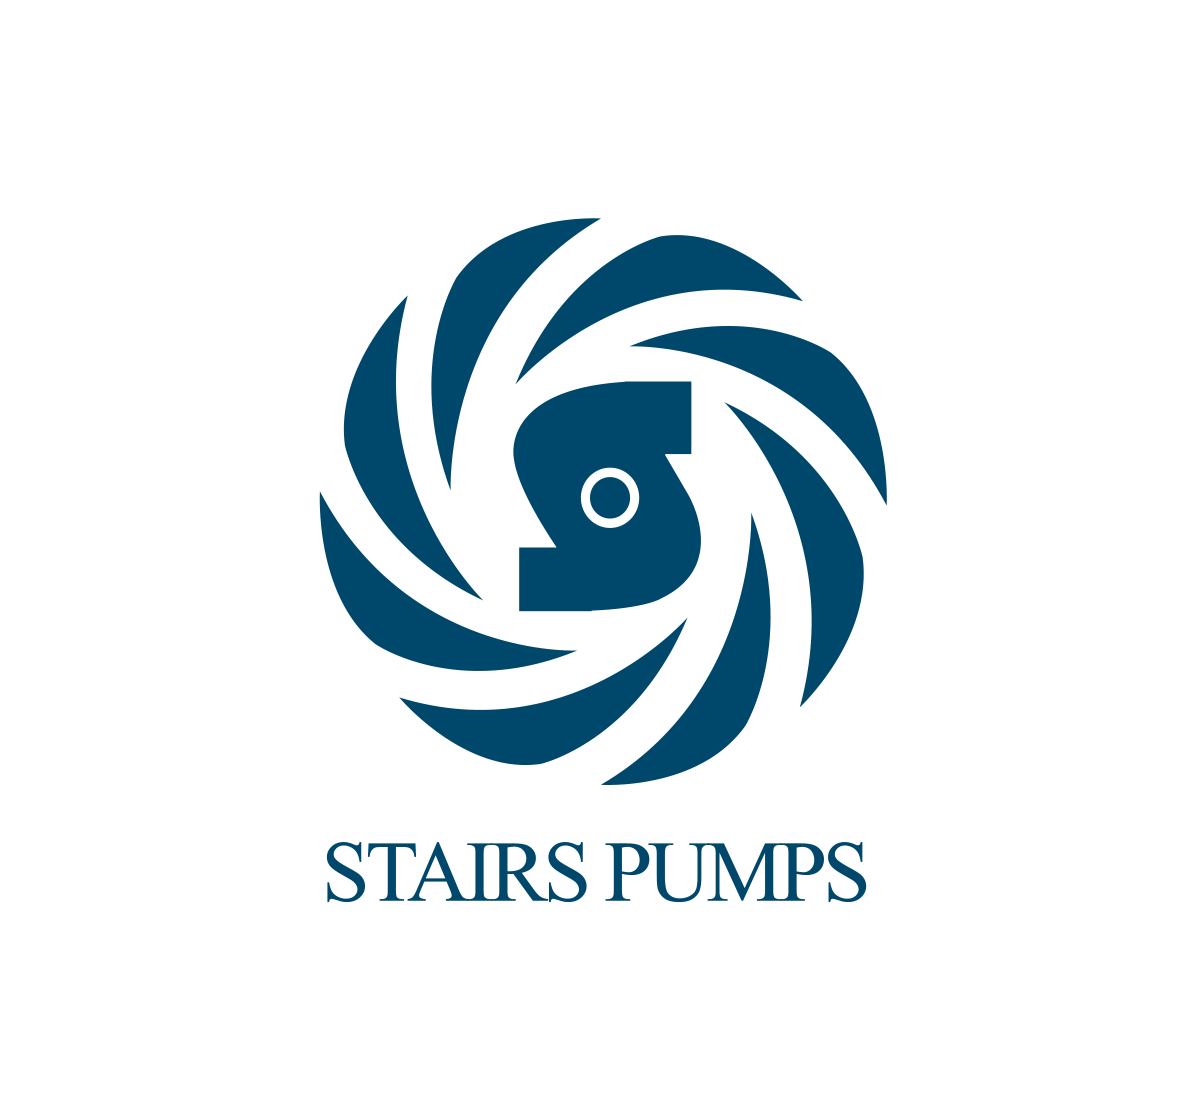 Stairs Pumps - Rolo & Pereira